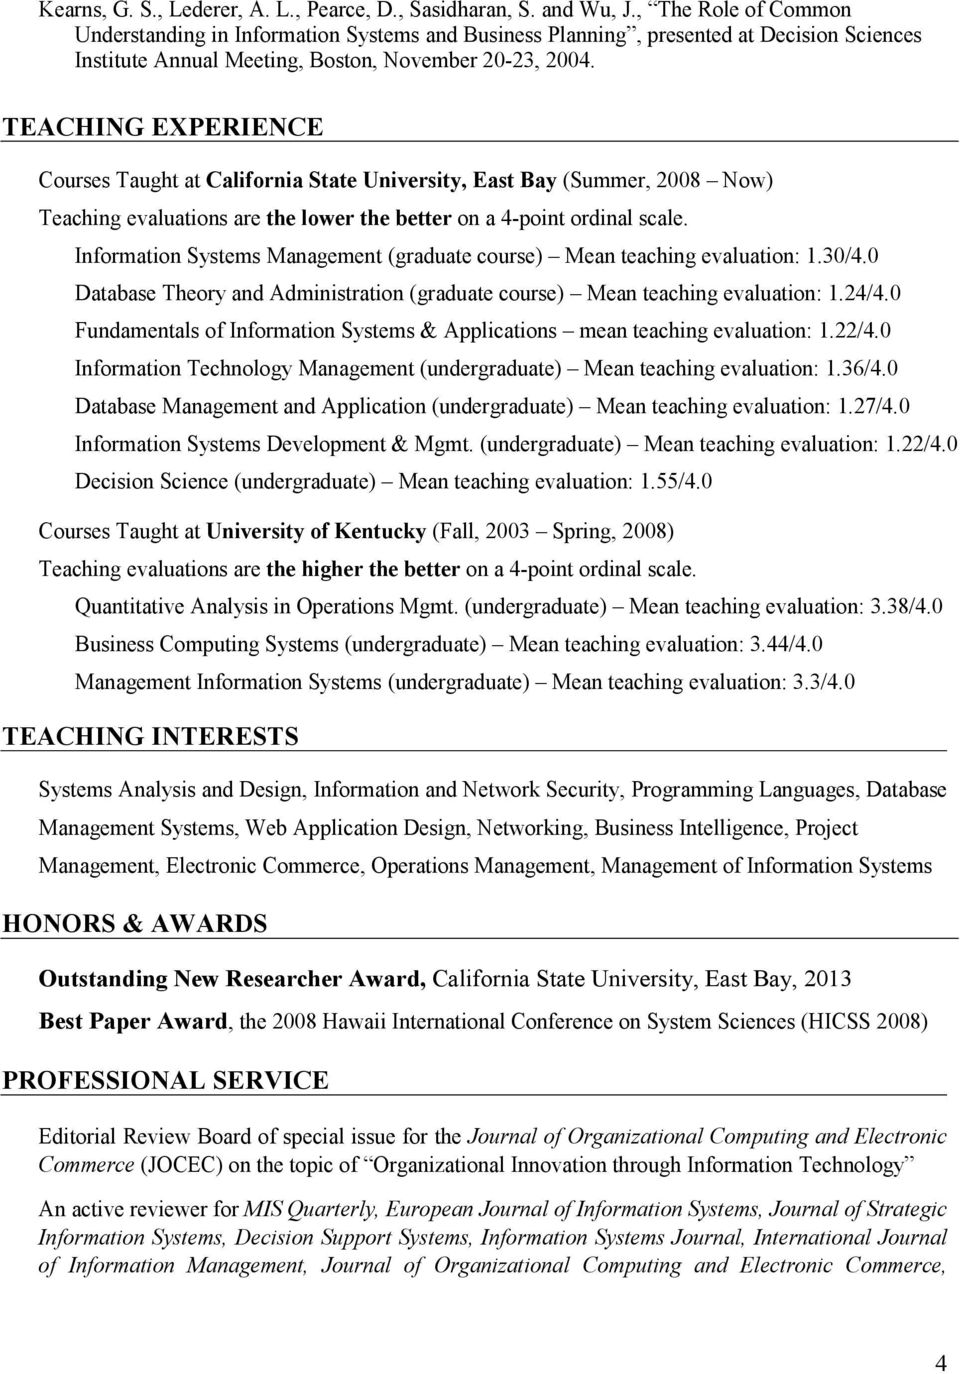 TEACHI G EXPERIE CE Courses Taught at California State University, East Bay (Summer, 2008 Now) Teaching evaluations are the lower the better on a 4-point ordinal scale.